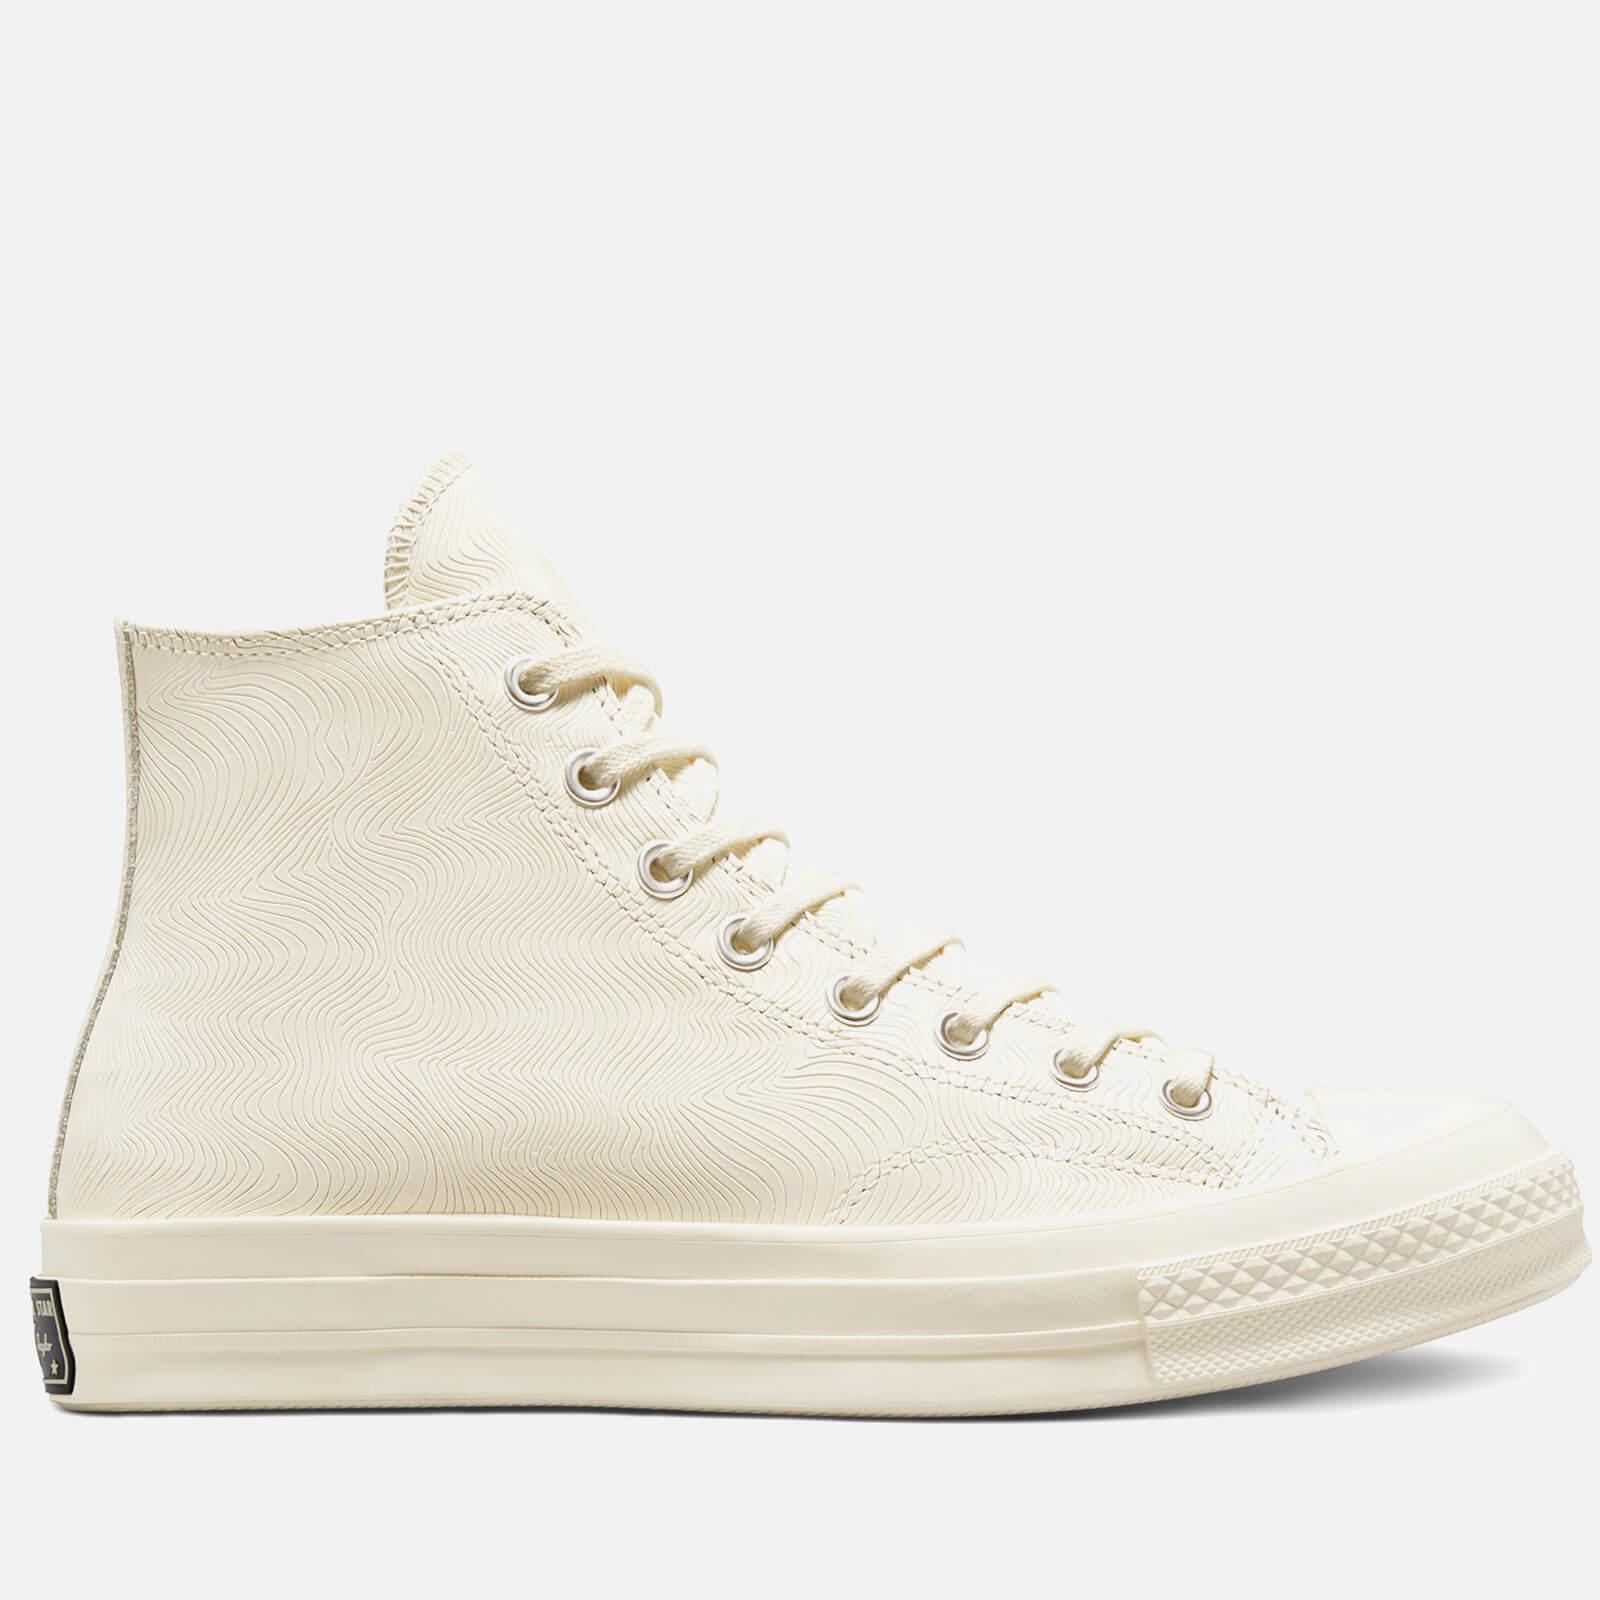 Converse Chuck 70 Seasonal Elevated Leather Hi-top Trainers in White | Lyst